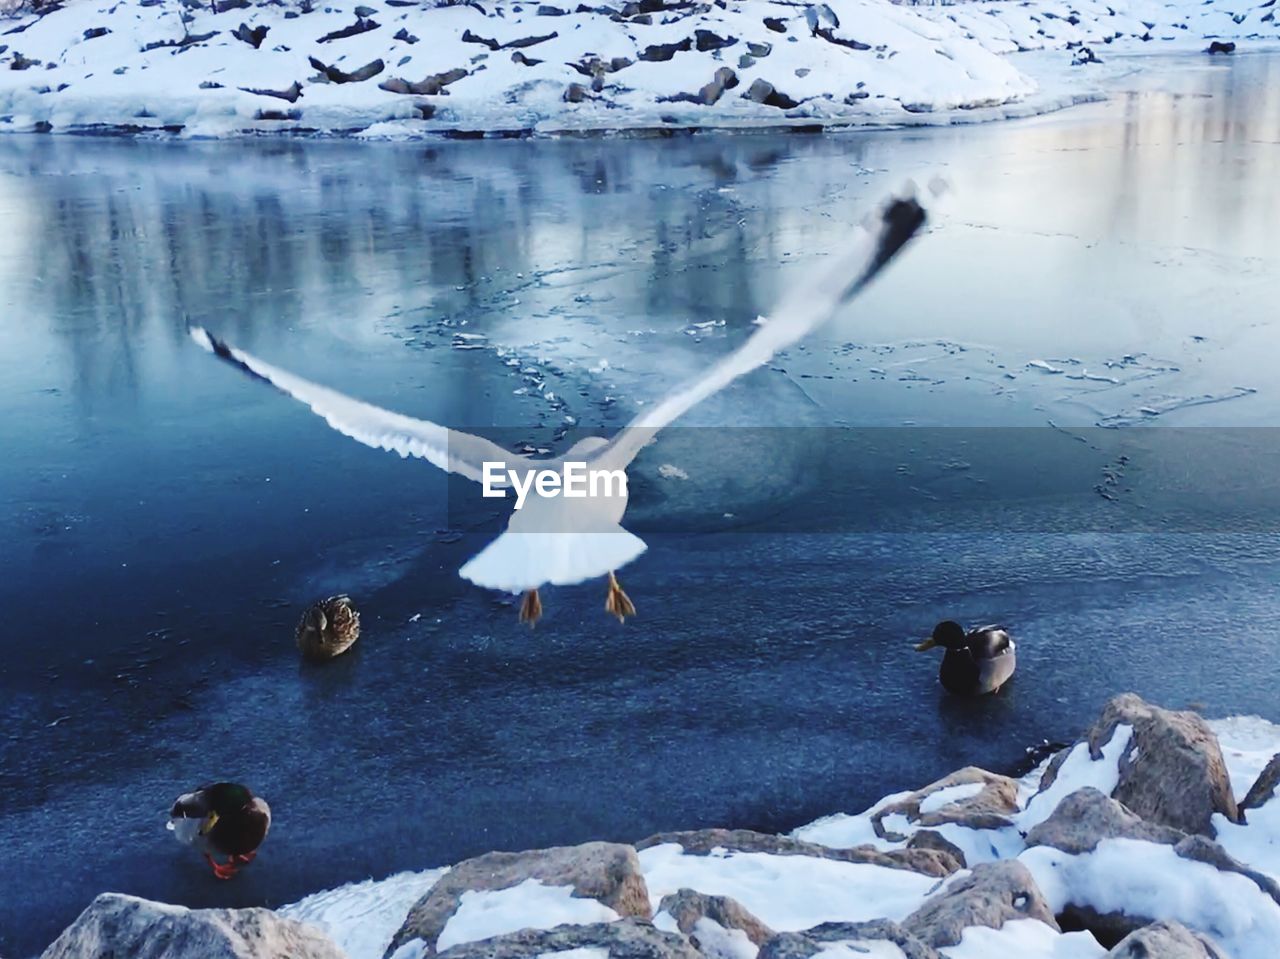 Close-up of seagull flying over lake during winter